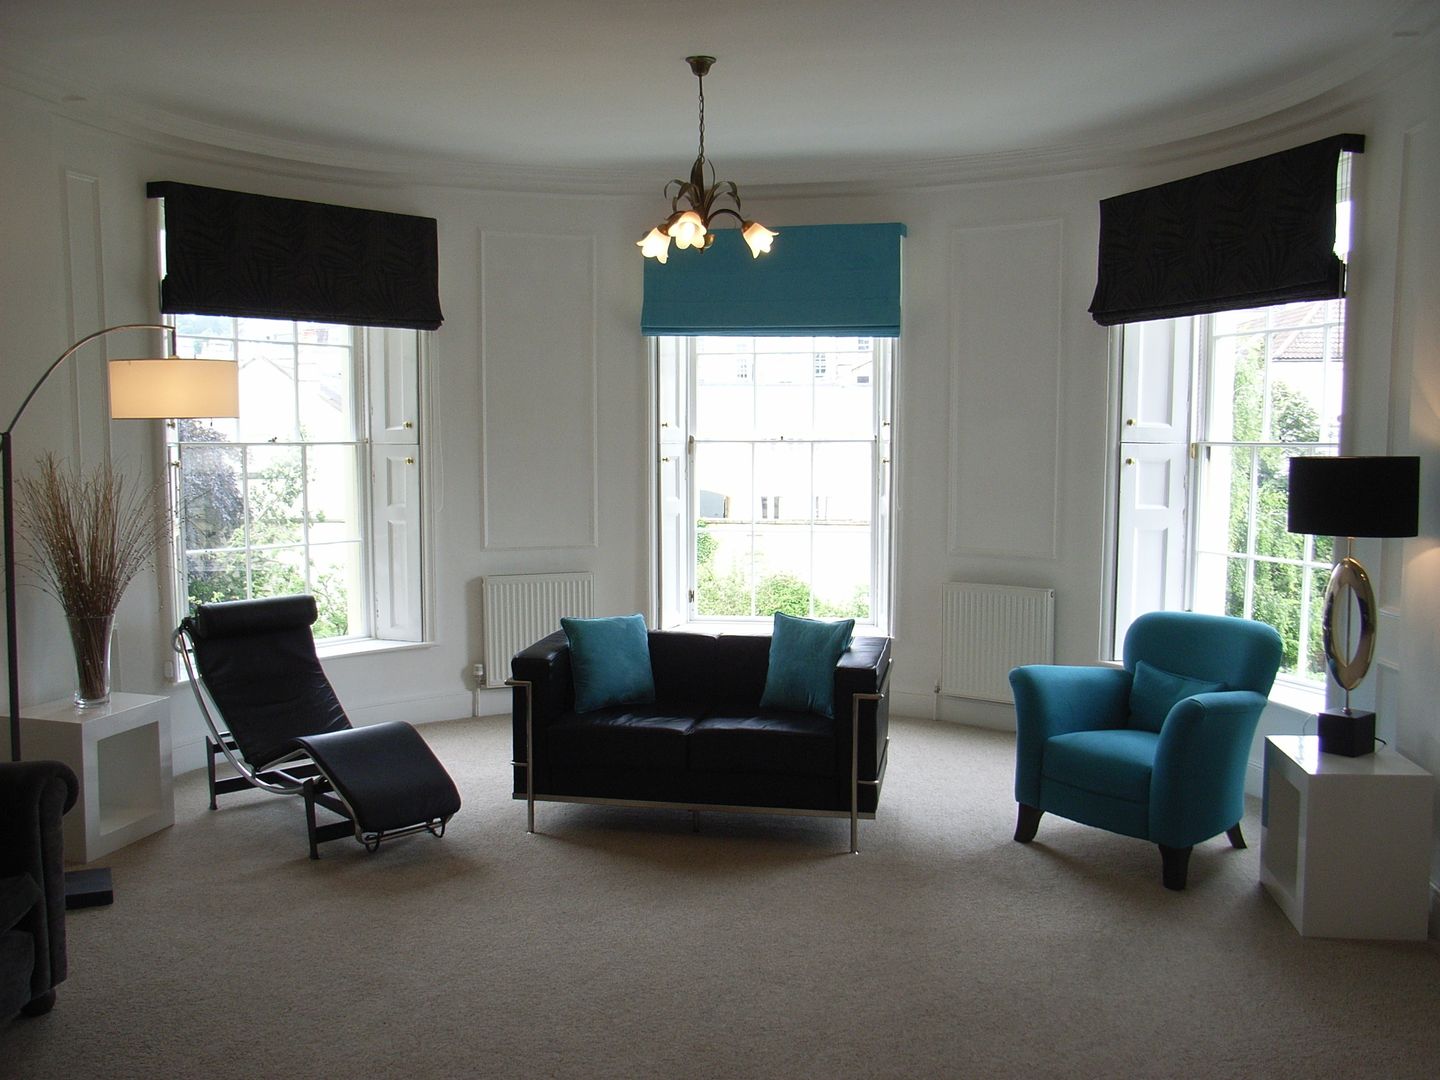 Georgian Sitting Room Style Within Salas modernas georgian room,georgian property,sitting room,living room,contemporary,roman blinds,blue armchair,classic armchair,classic furniture,iconic furniture,modern chaise,modern sofa